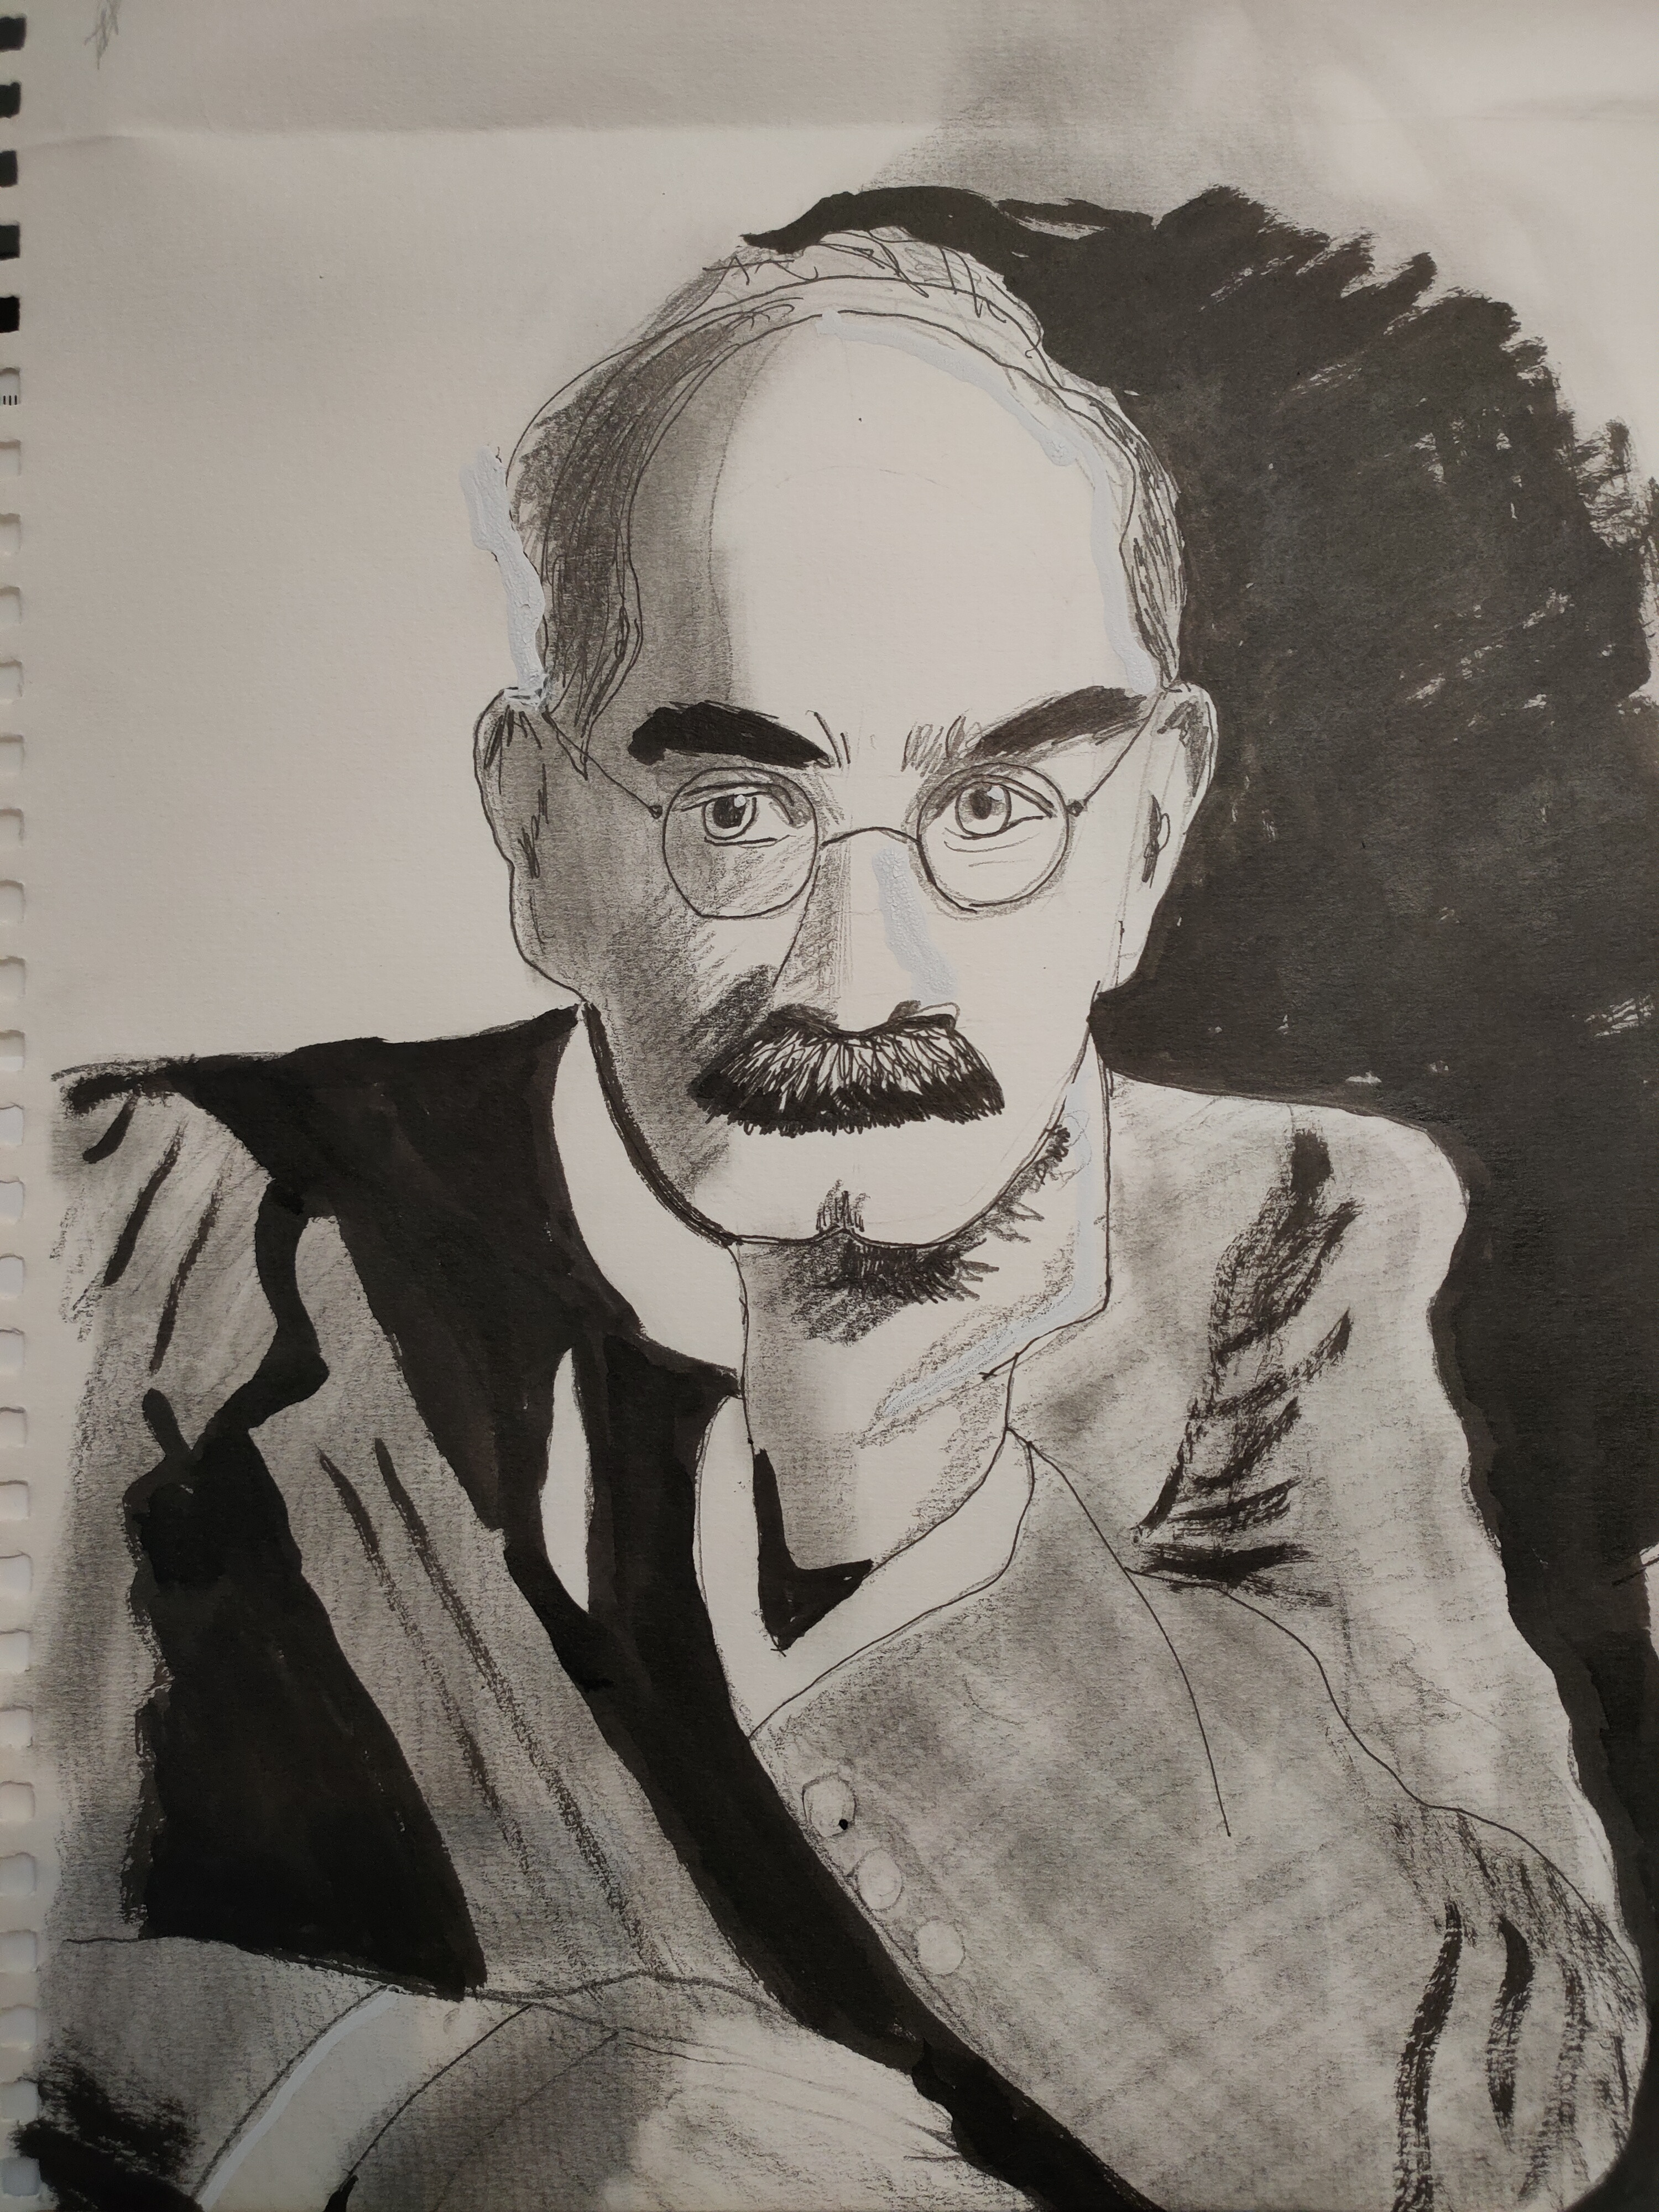 Pencil and ink portrait of Rudyard Kipling, the writer of The Jungle Book